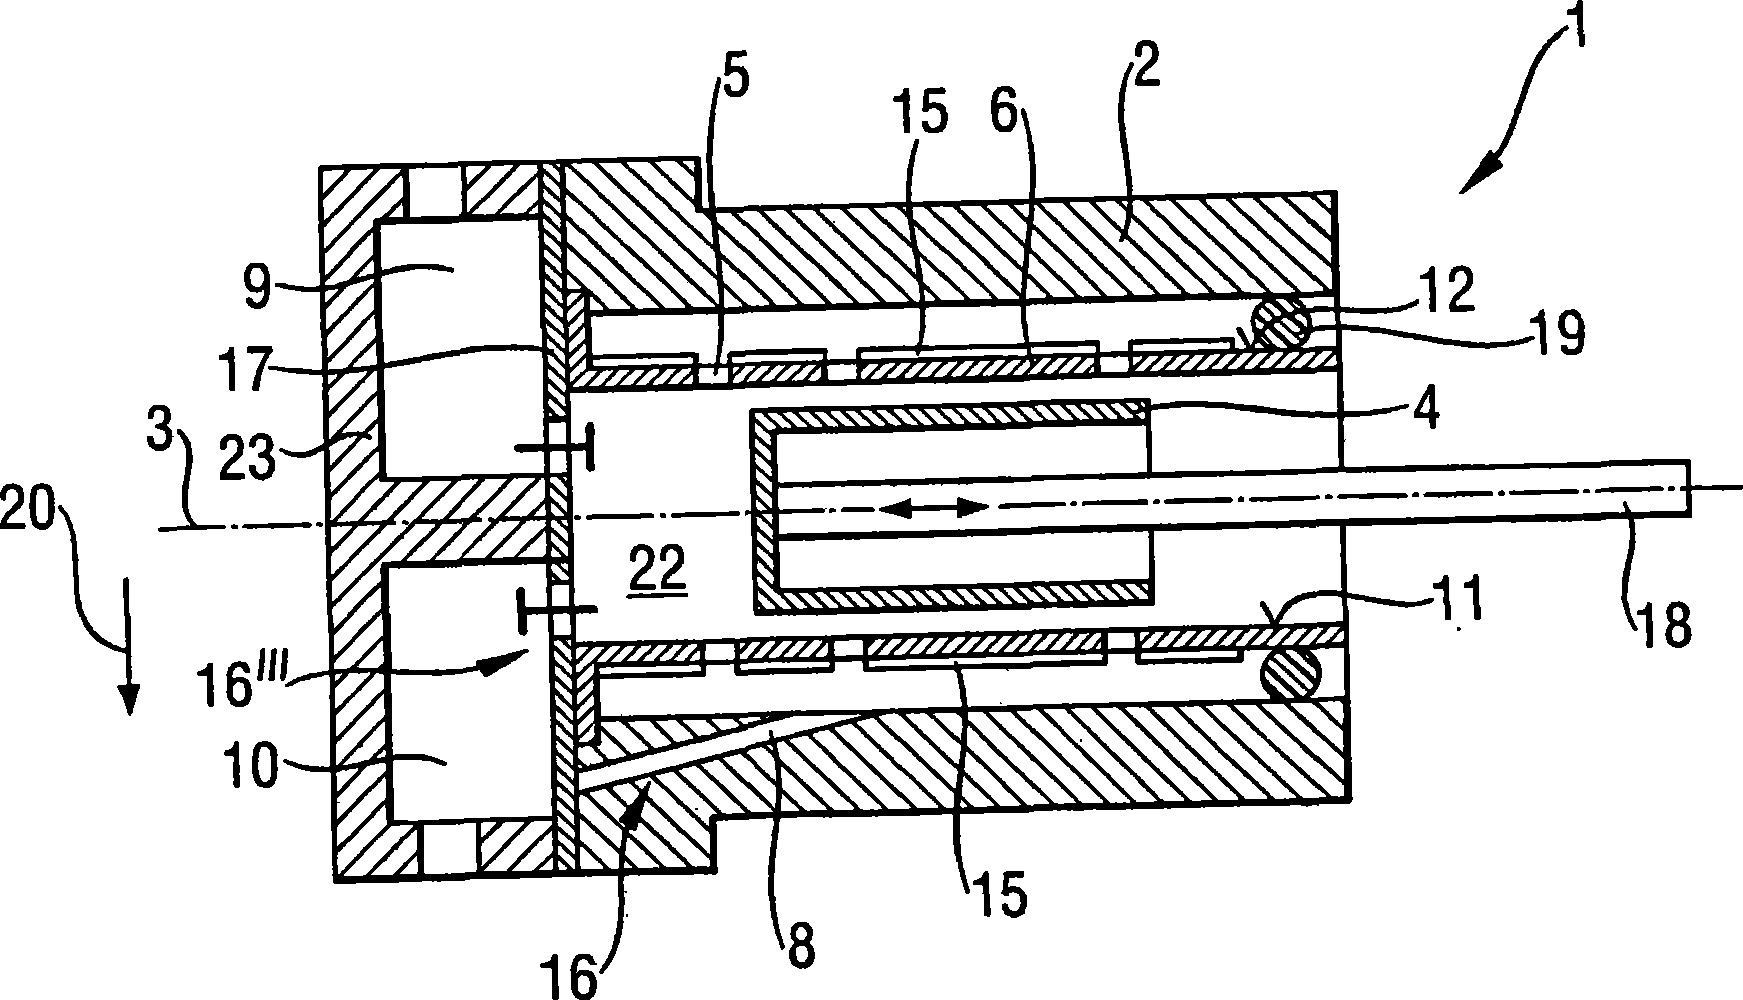 Linear compressor or refrigerating unit comprising a discharge device for fluid condensate